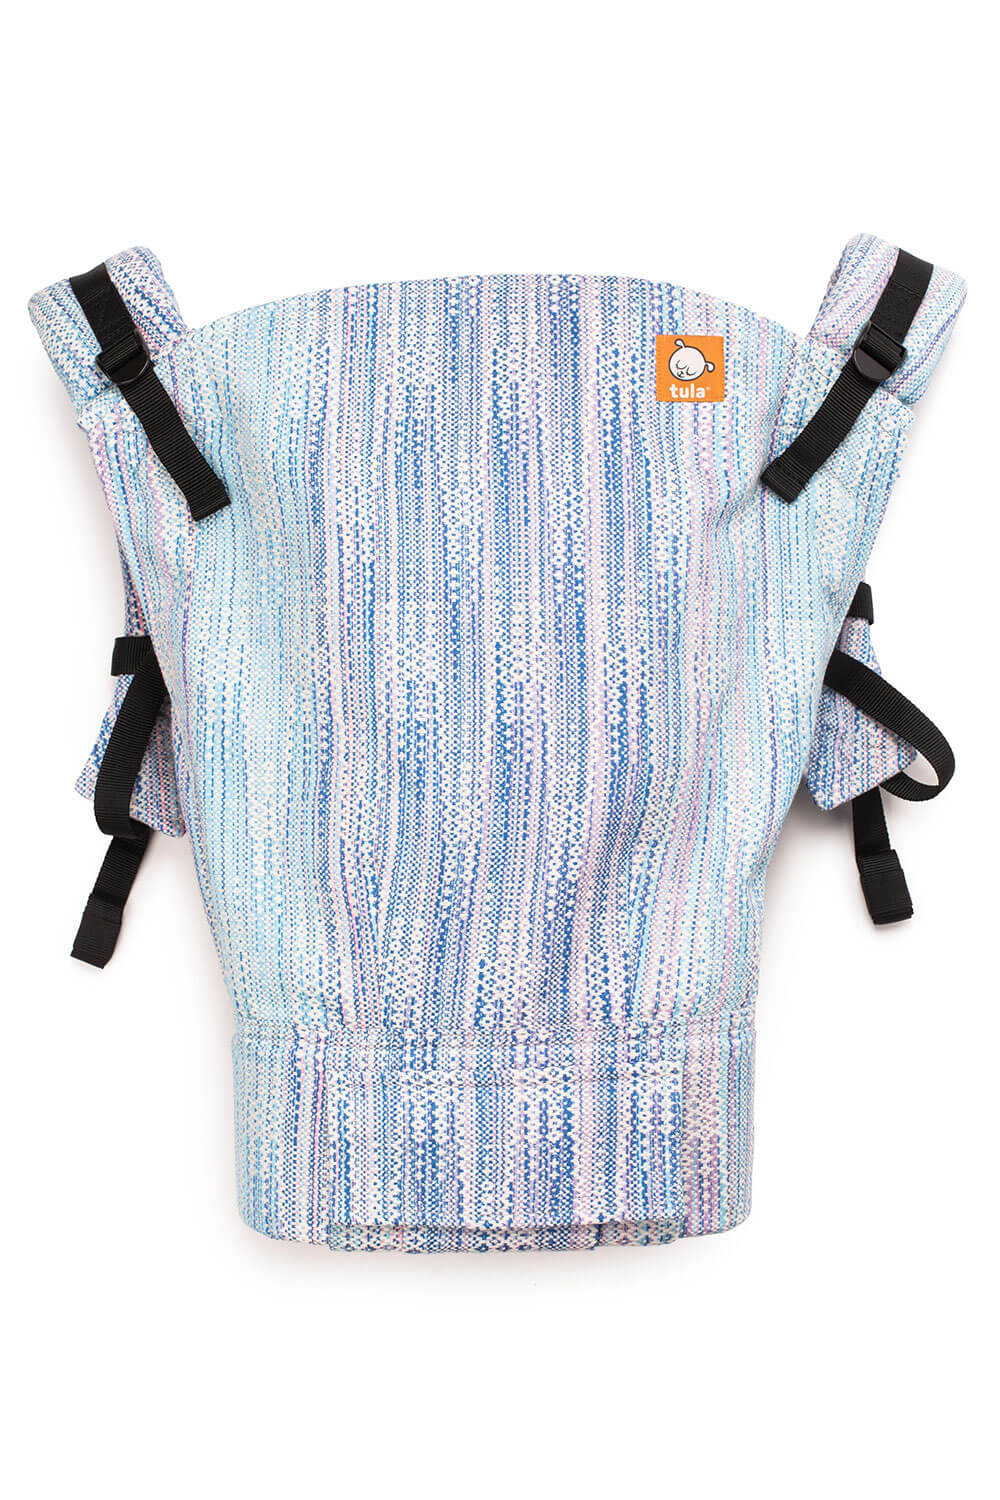 Harmony Ice Flower - Signature Woven Toddler Carrier